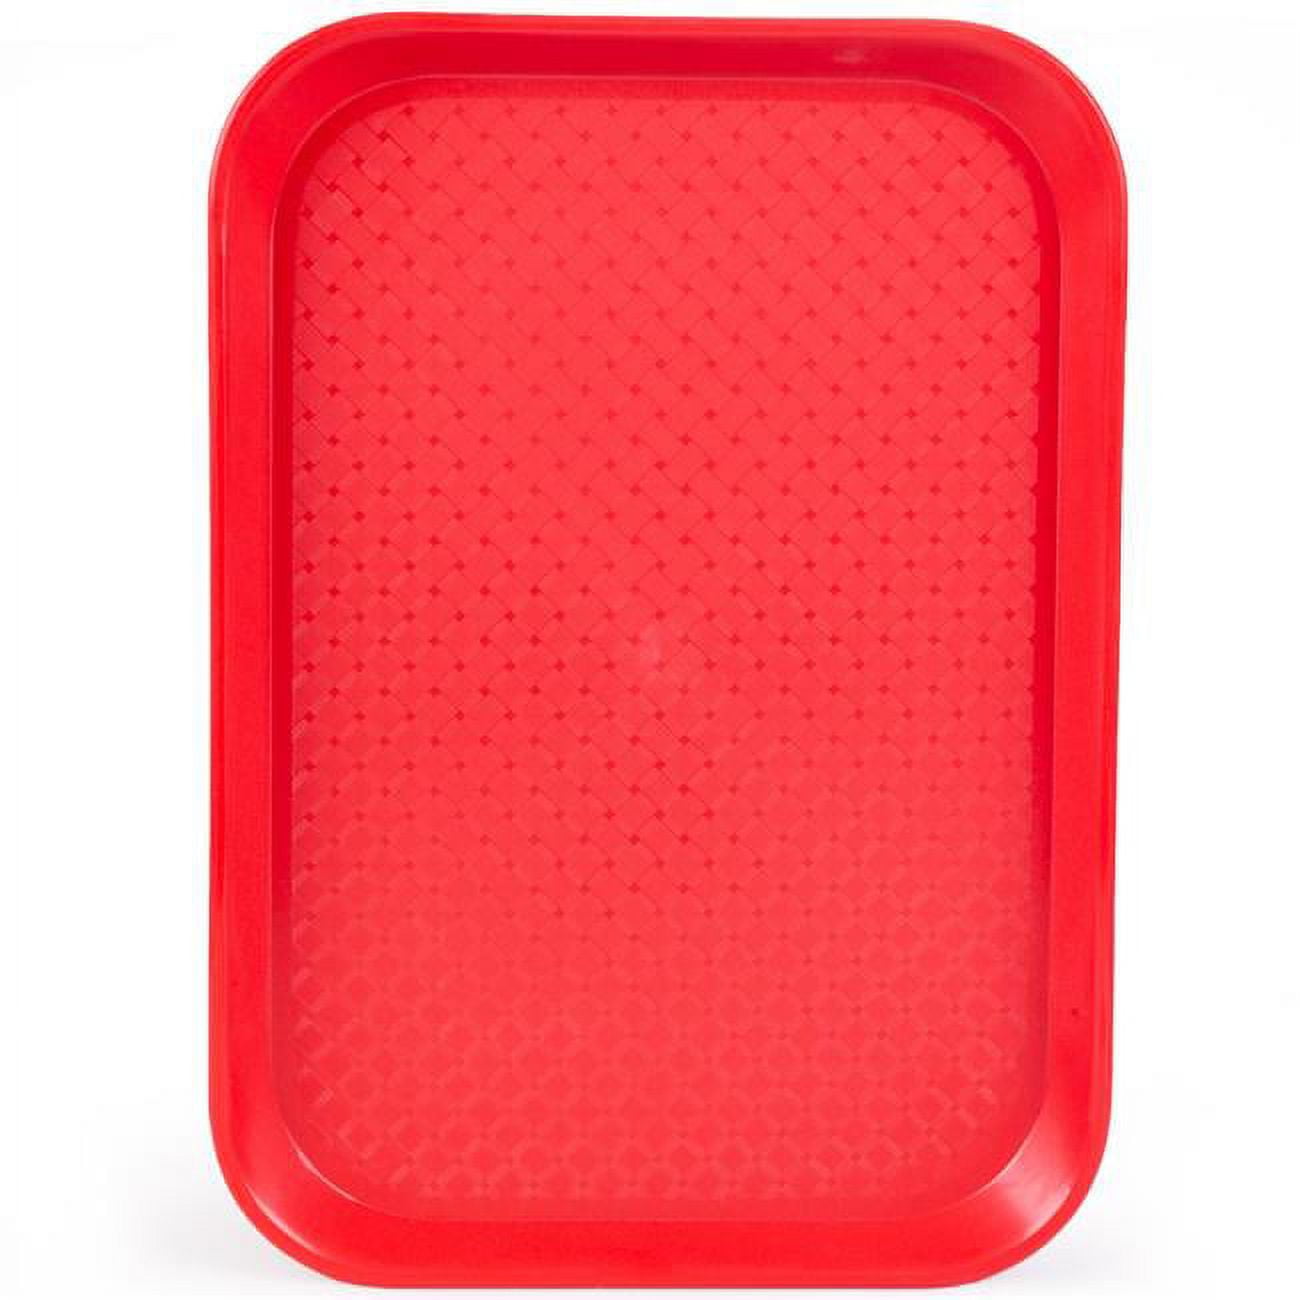 Kcaf-103 10 X 14 In. Cafeteria Tray, Red